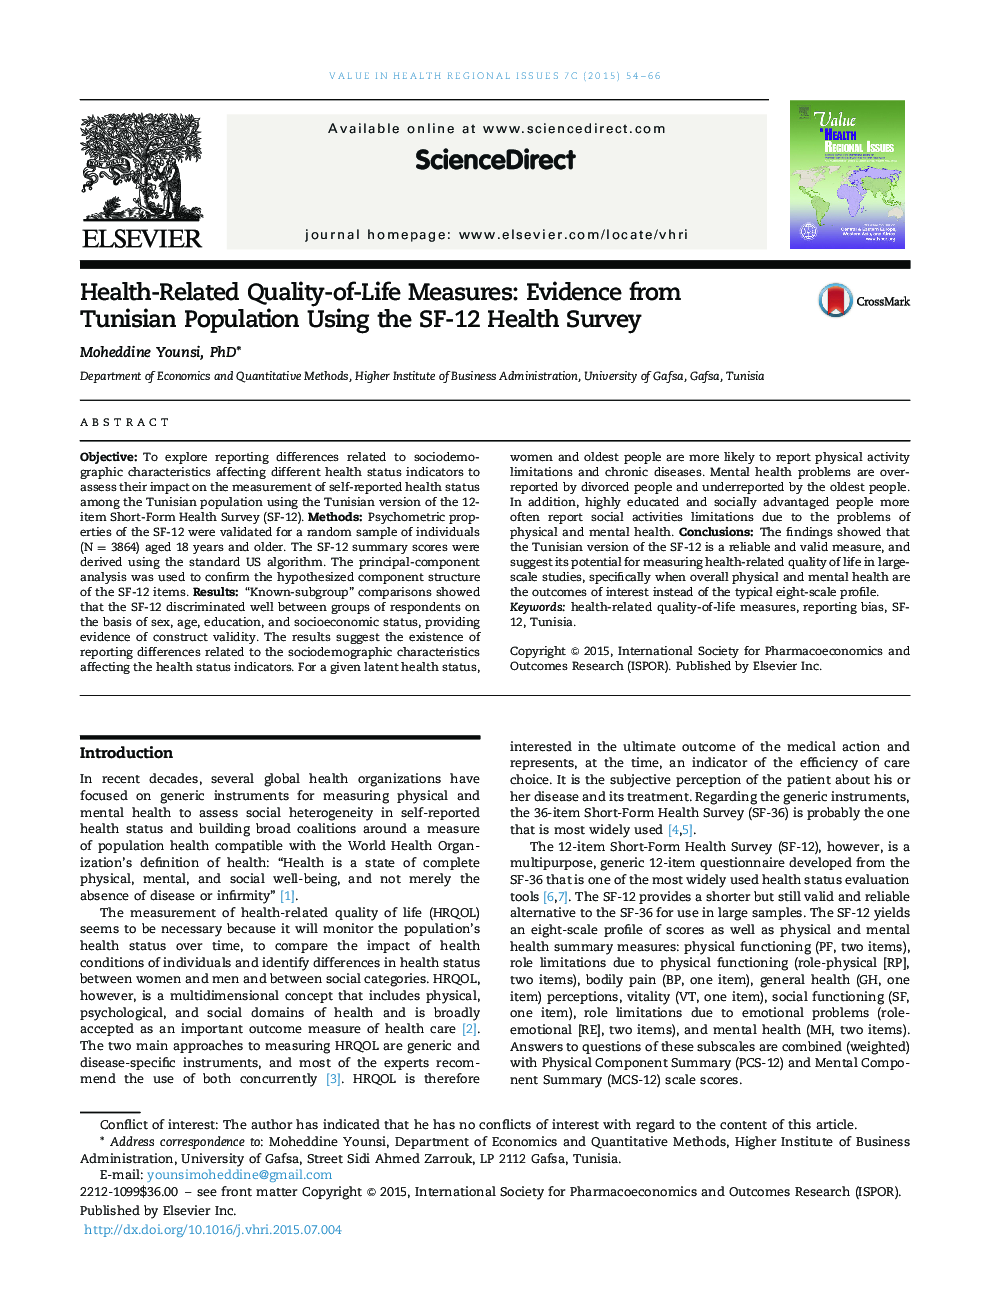 Health-Related Quality-of-Life Measures: Evidence from Tunisian Population Using the SF-12 Health Survey 